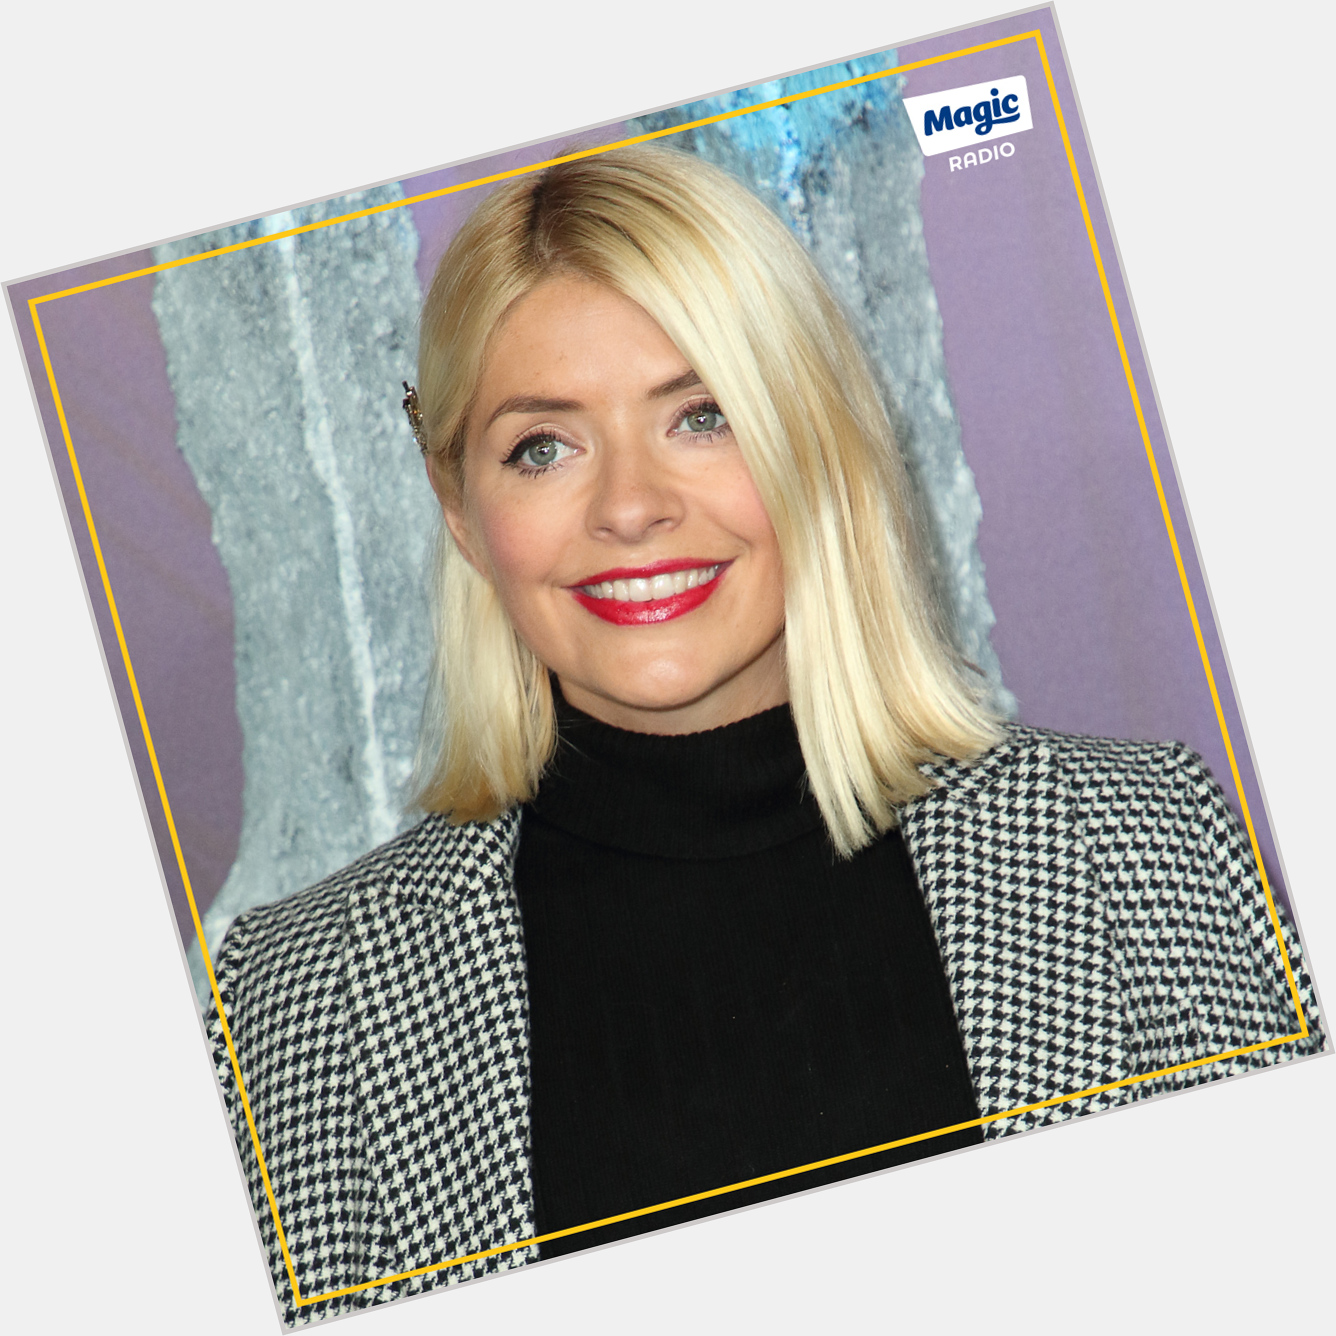 Happy Birthday Holly Willoughby! Send her some birthday love 